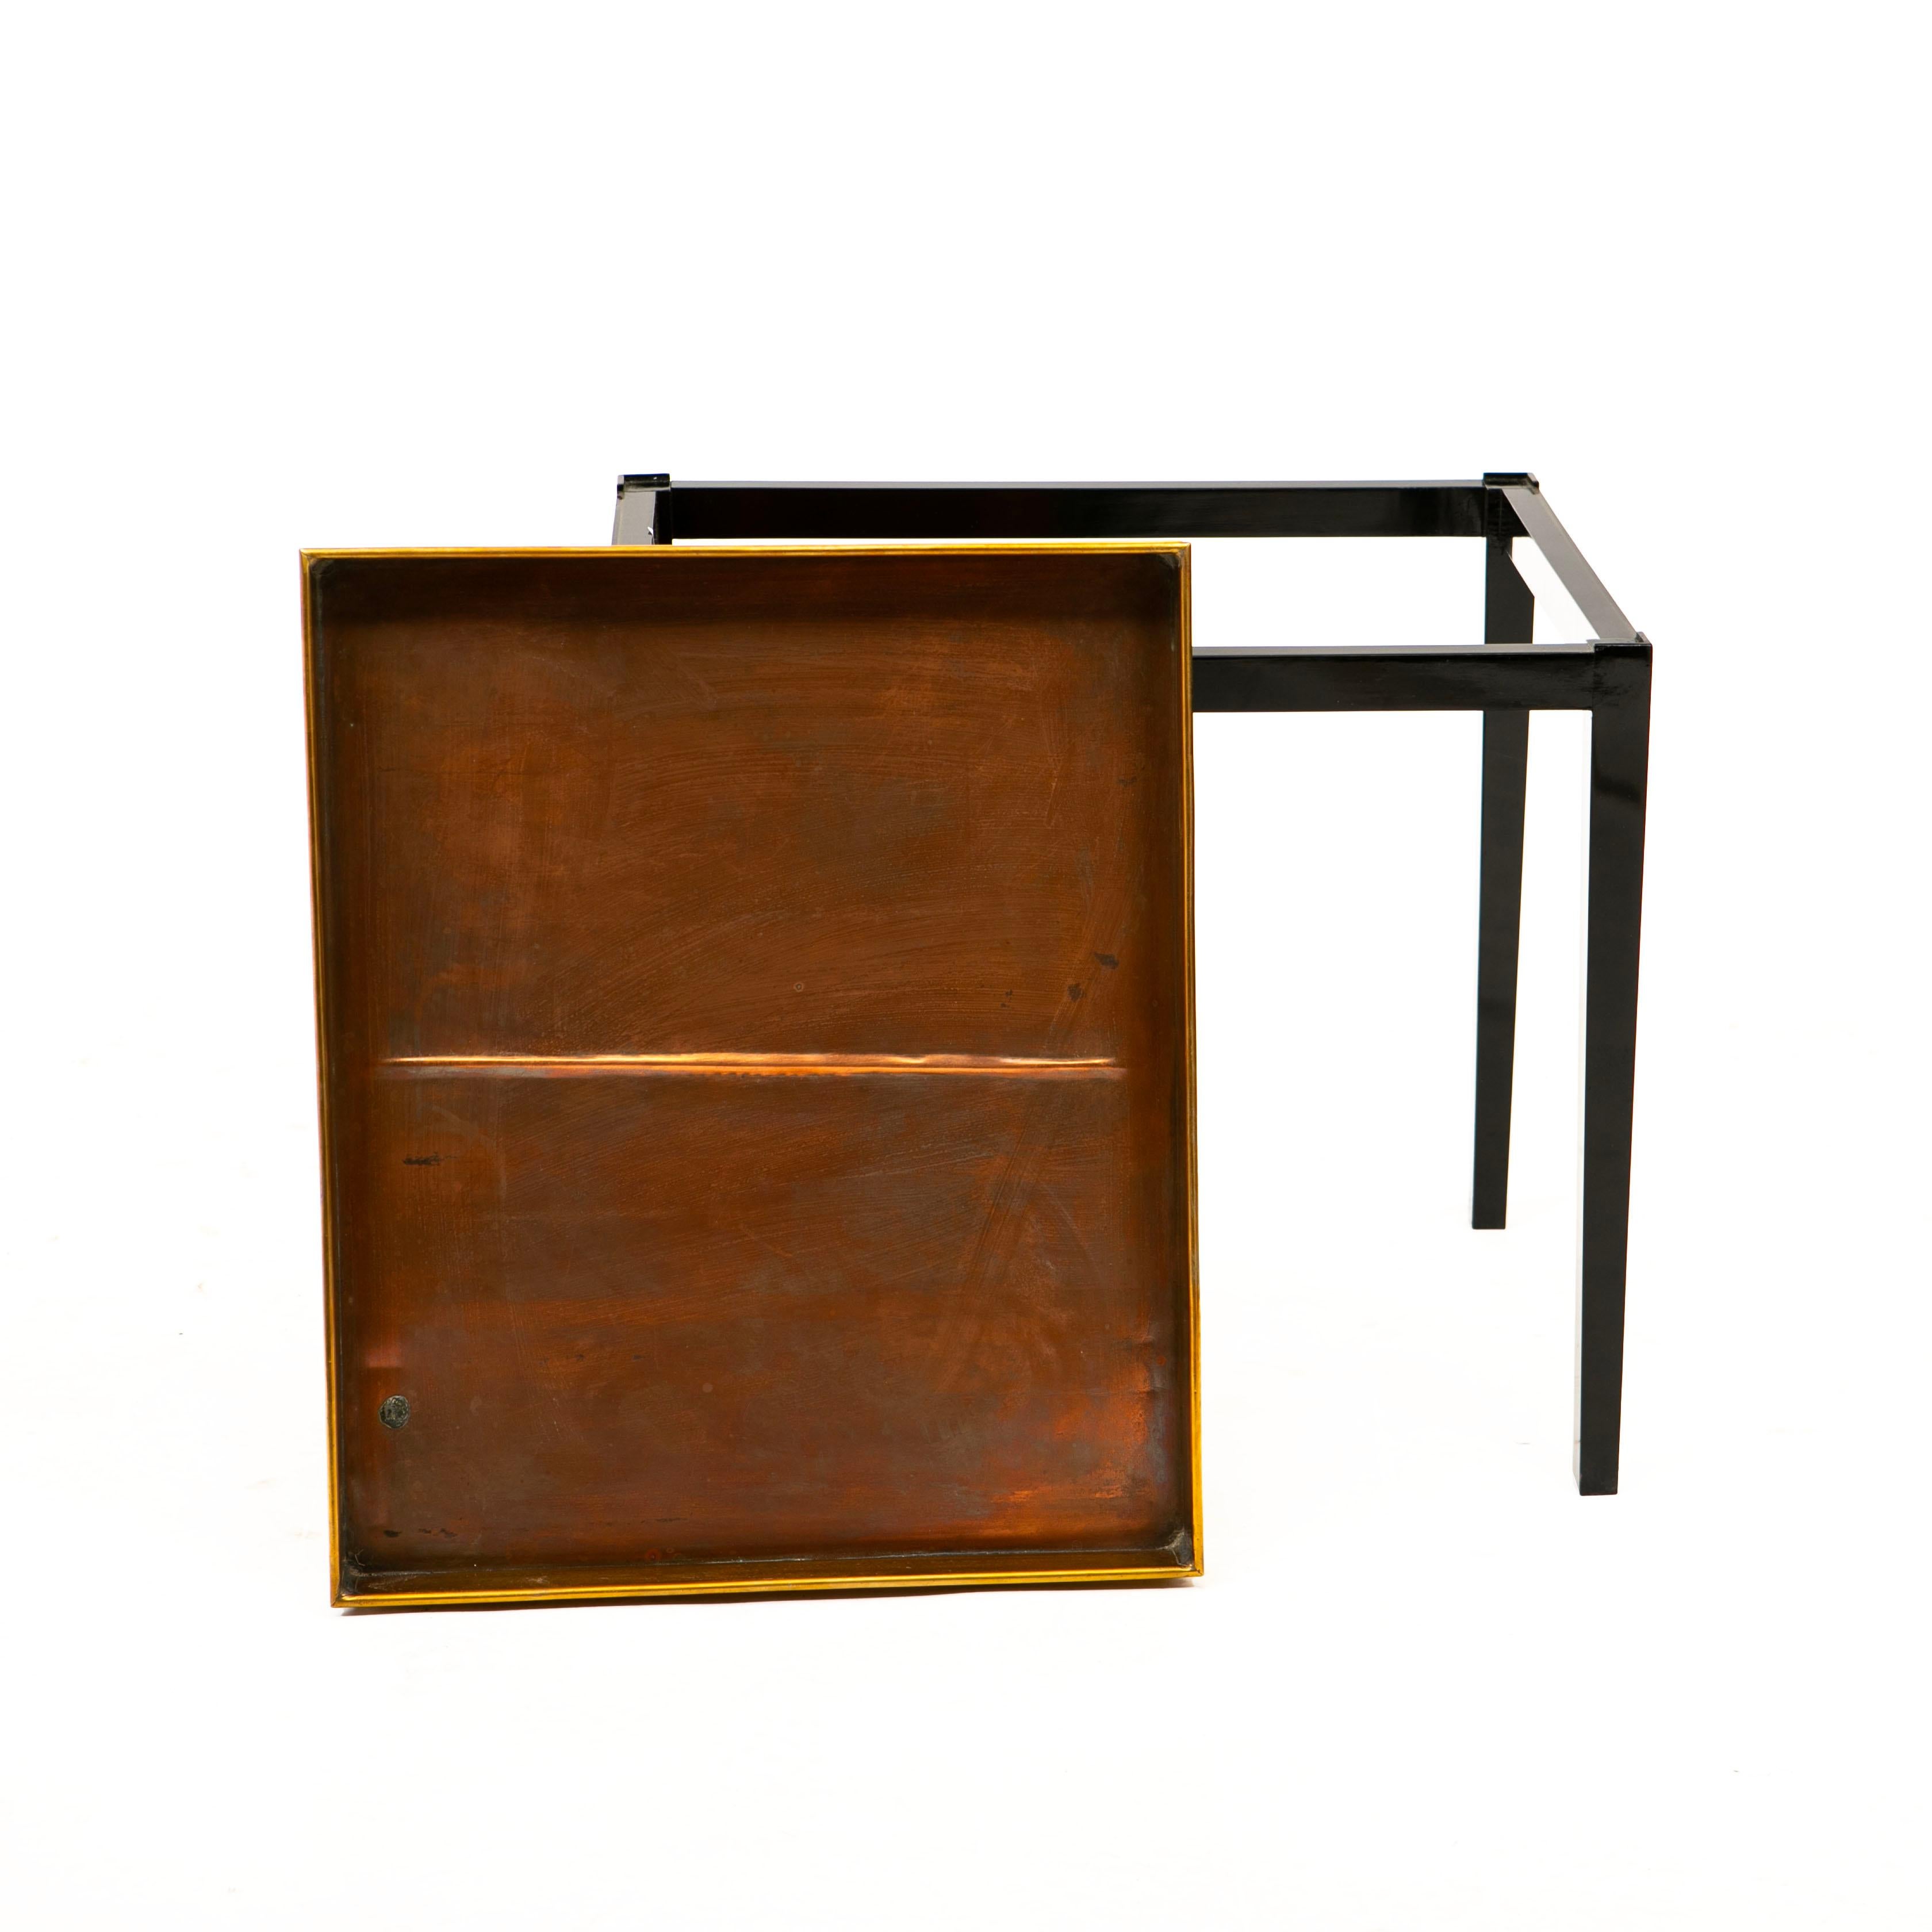 20th Century Tray Table Brass / Copper Black Polished Base For Sale